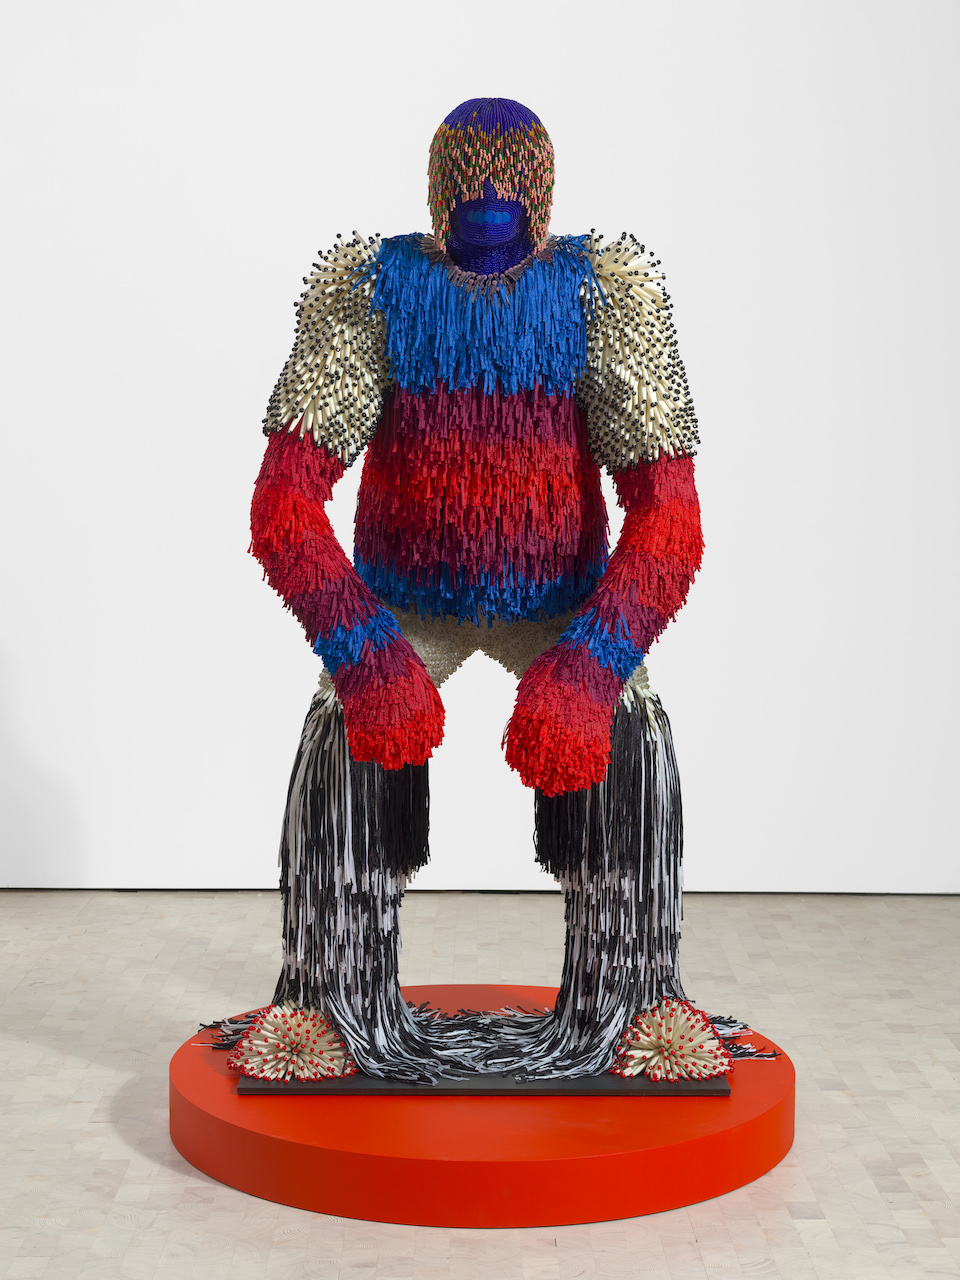 The Wick - Jeffrey Gibson, 'Untitled Figure 1', 2022. Plastic bone pipe beads, fringe, glass beads, artificial sinew, tin cones, sea glass, acrylic felt, steel armature and powder coat varnish, 181.5 x 118 x 83 cm (71 1/2 x 46 1/2 x 32 5/8in). Copyright Jeffrey Gibson. Courtesy the artist and Stephen Friedman Gallery, London and New York. Photo by Todd-White Art Photography.